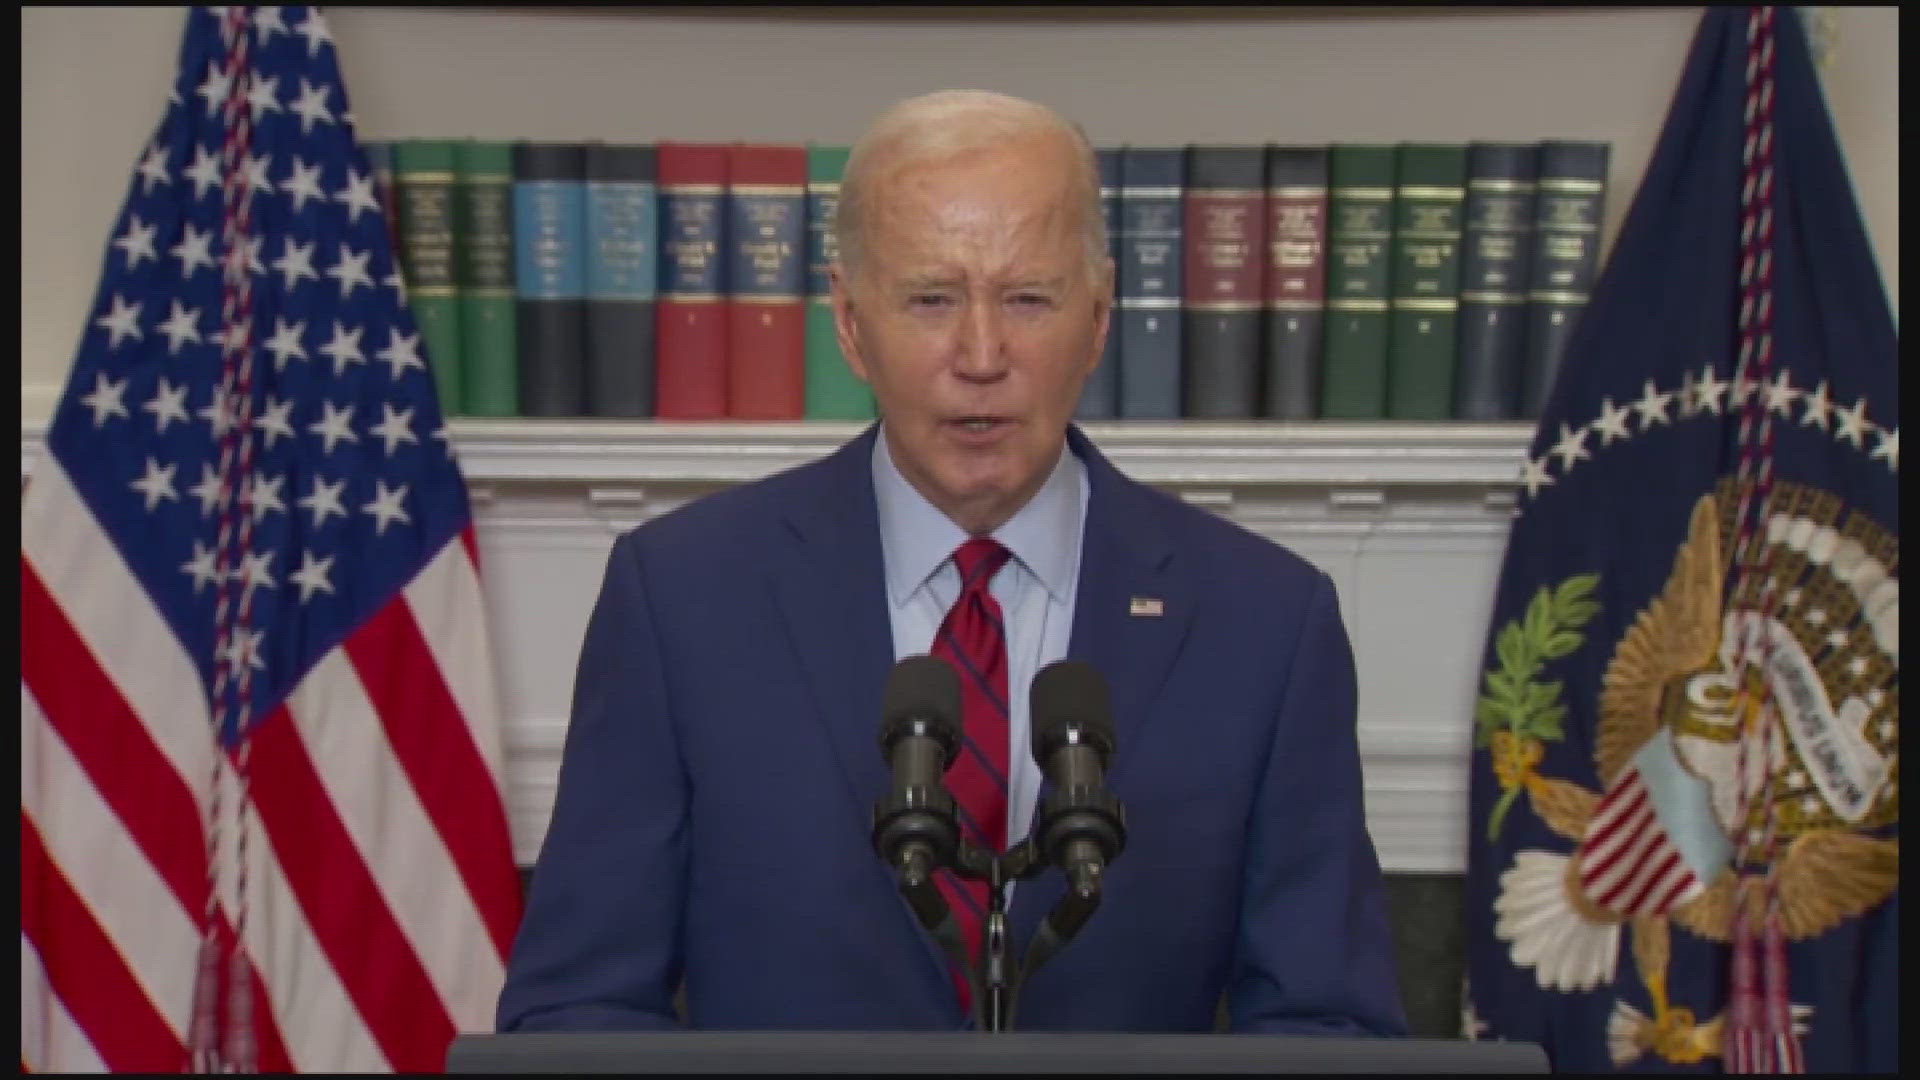 President Biden speaks from the White House on recent campus protests across the U.S.